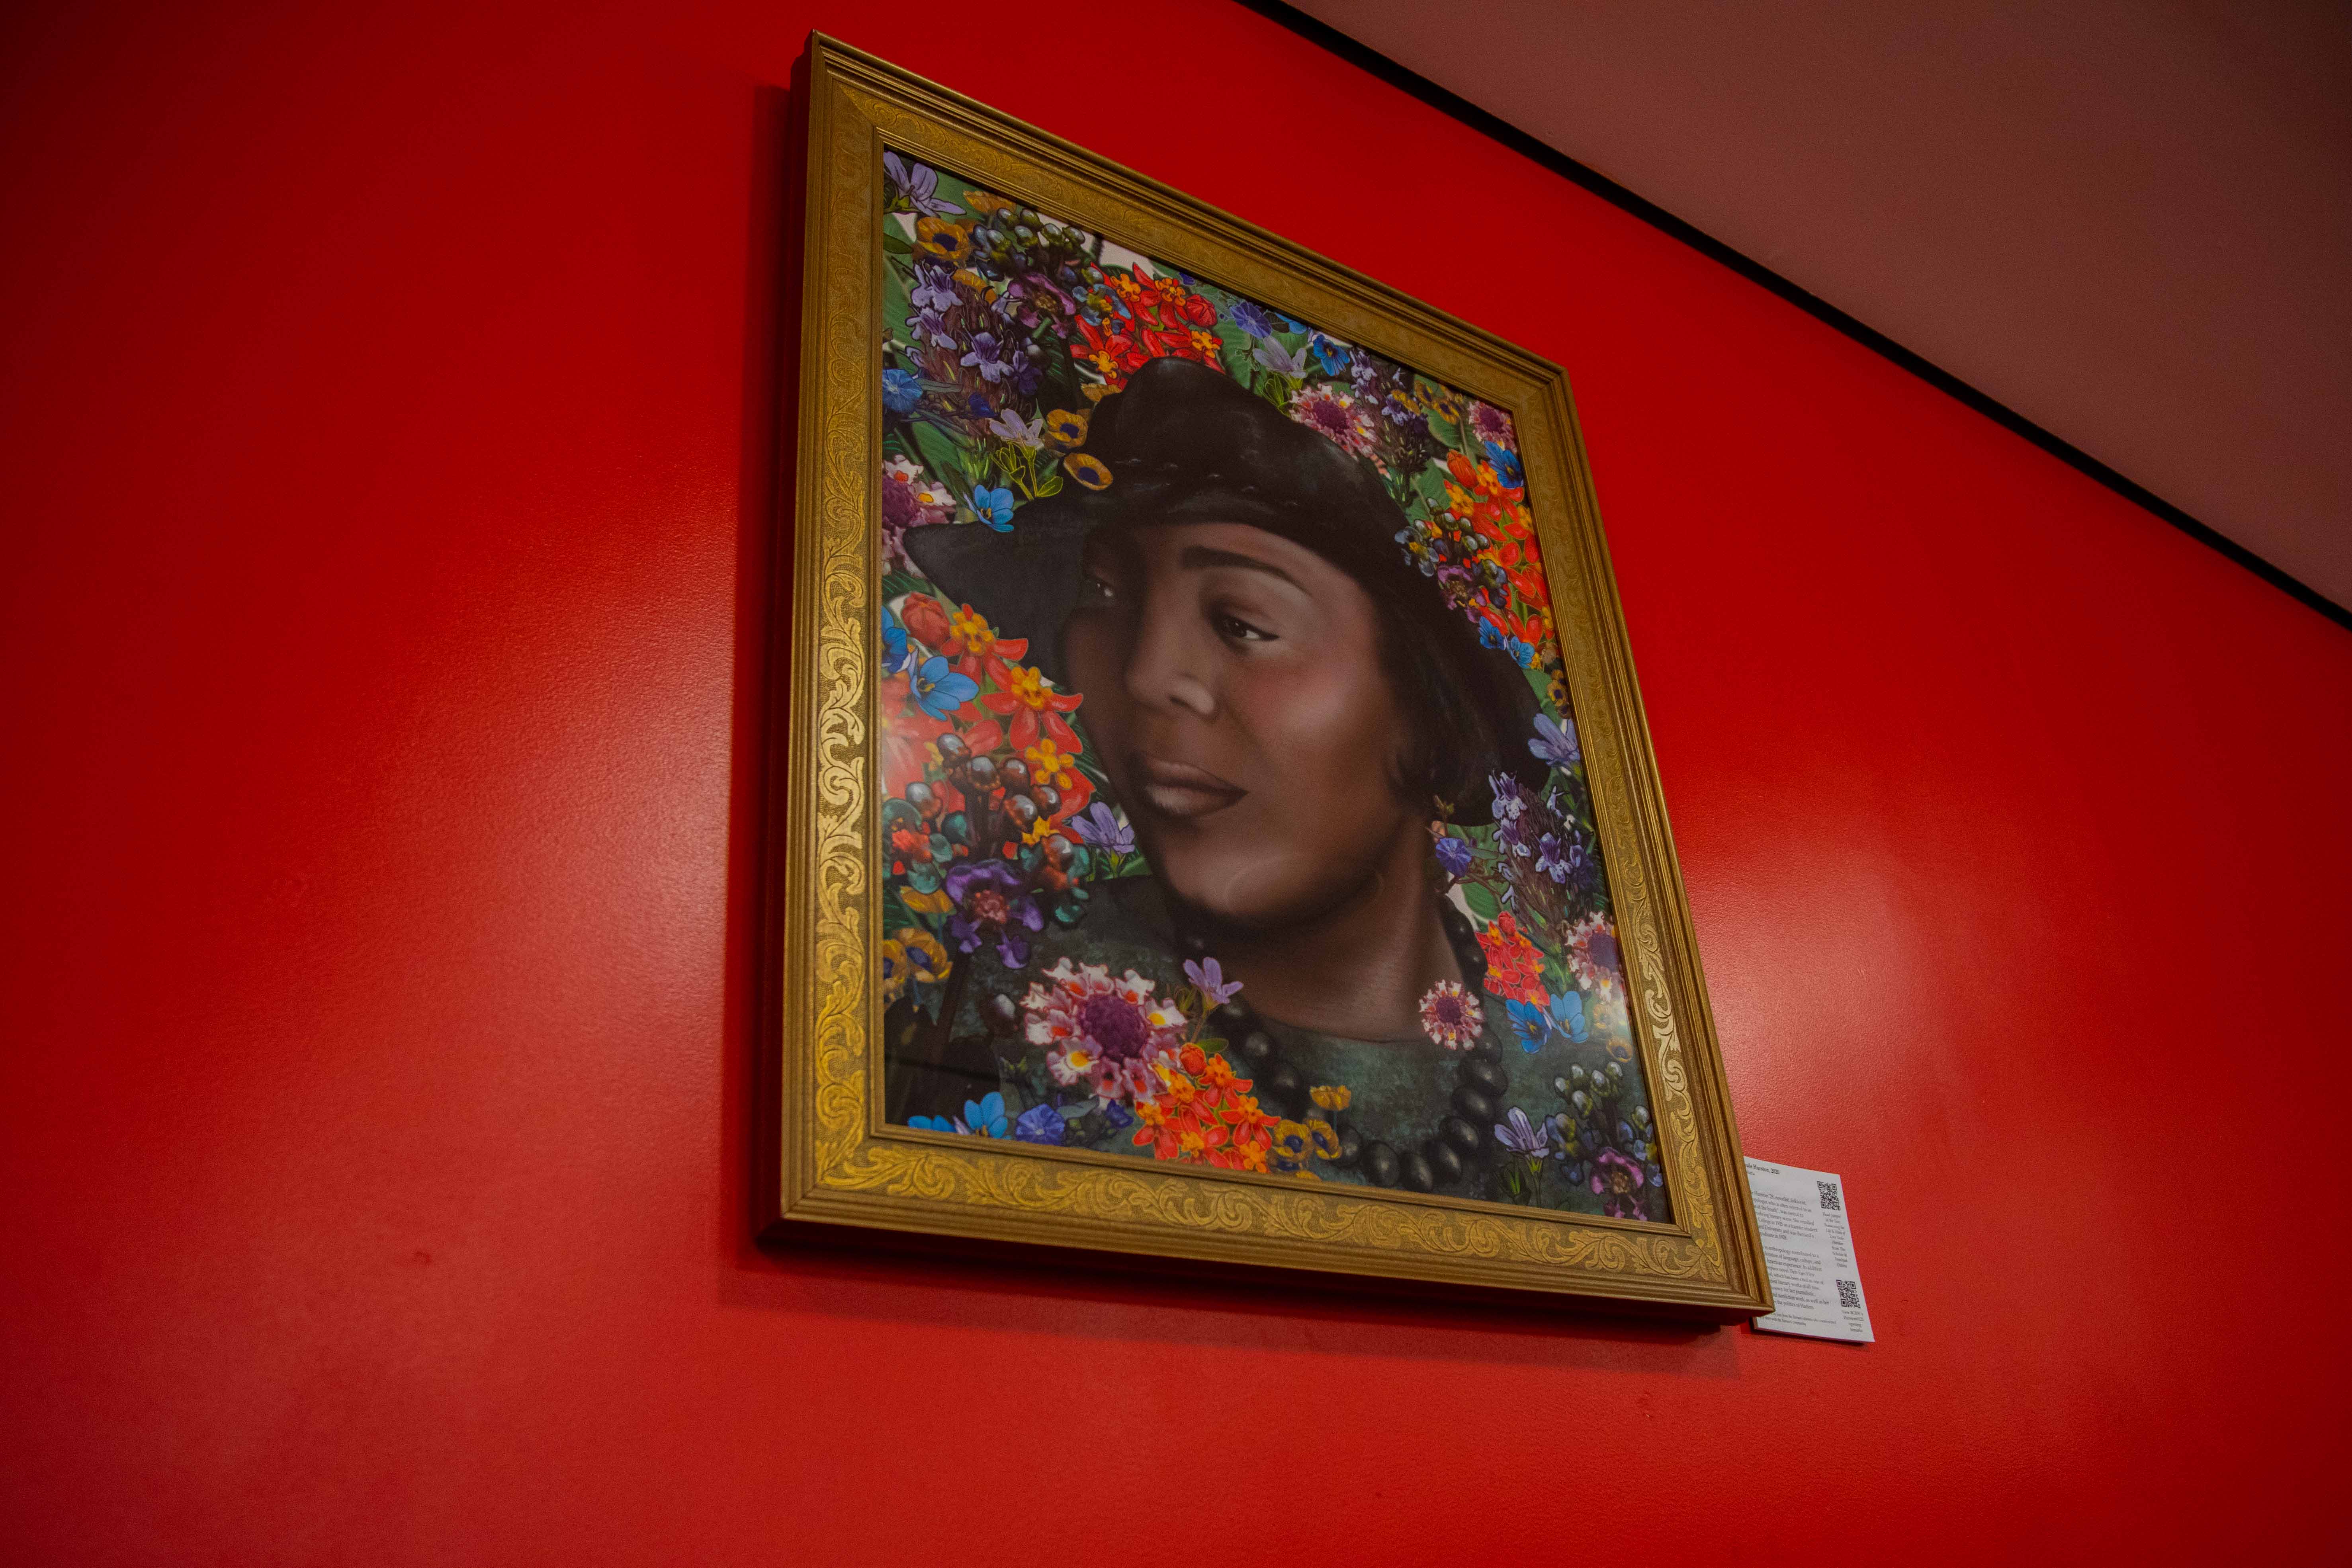 Zora Neale Hurston portrait hanging on red wall in Diana Center lower level.